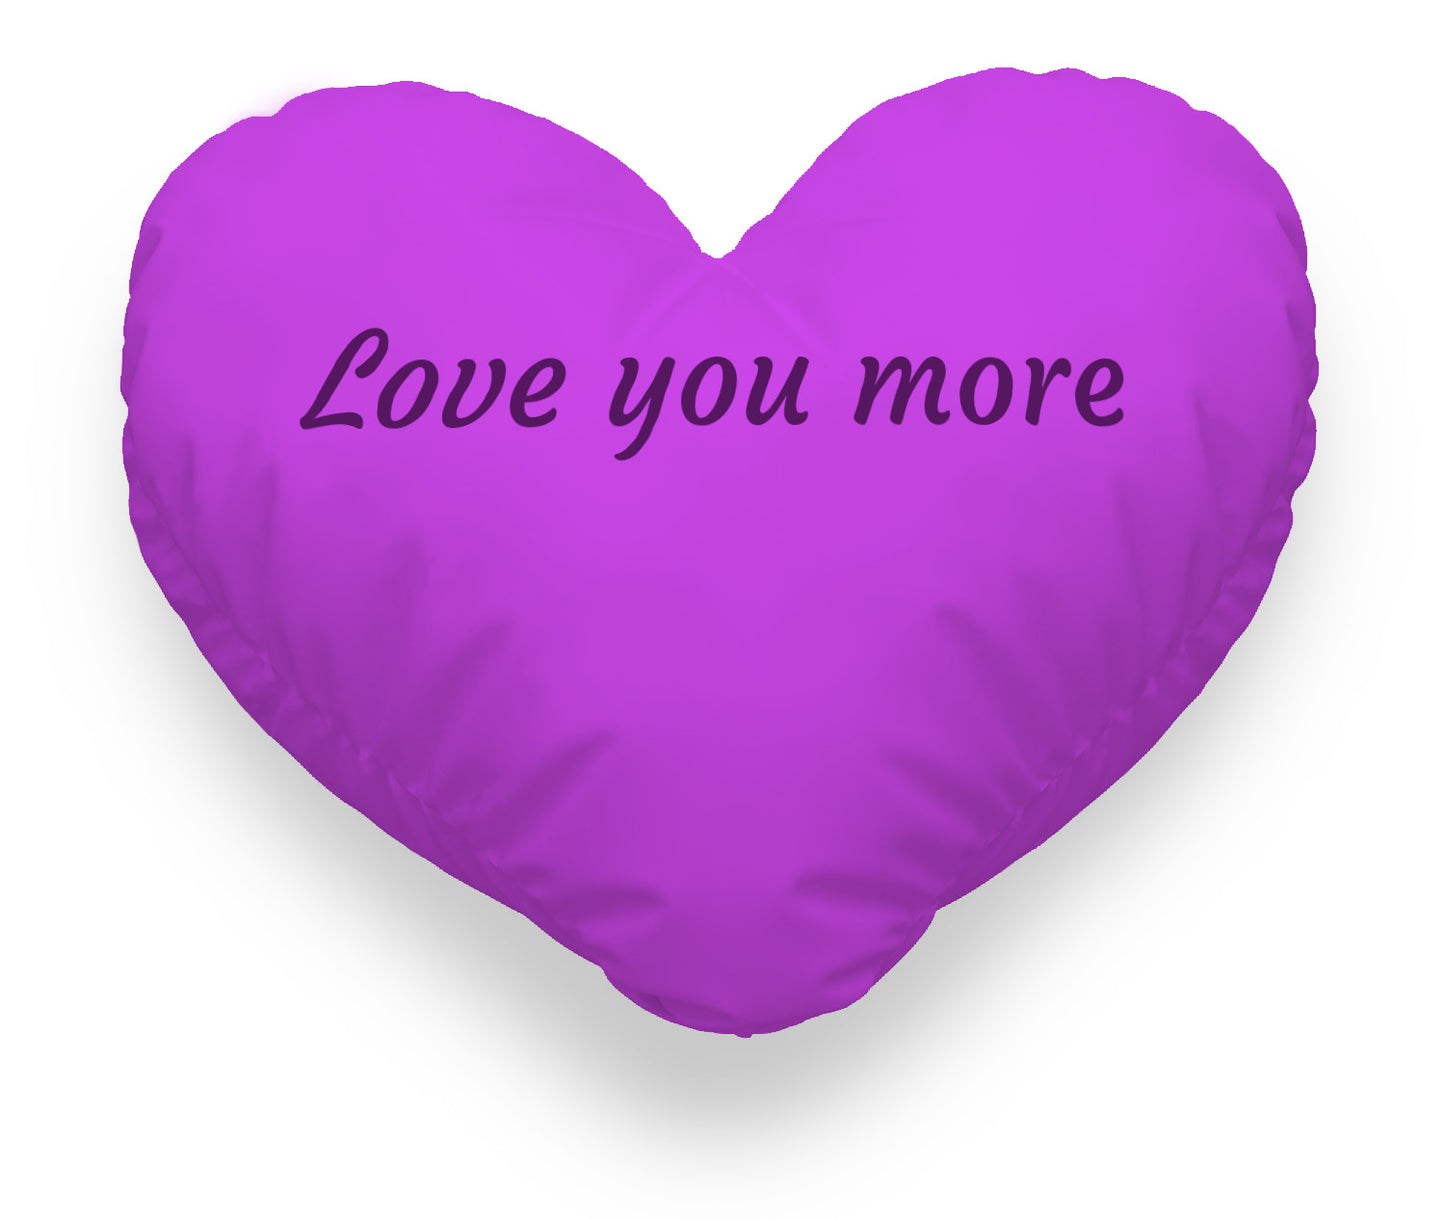 pinkl heart cushion. yellow text "love you more".